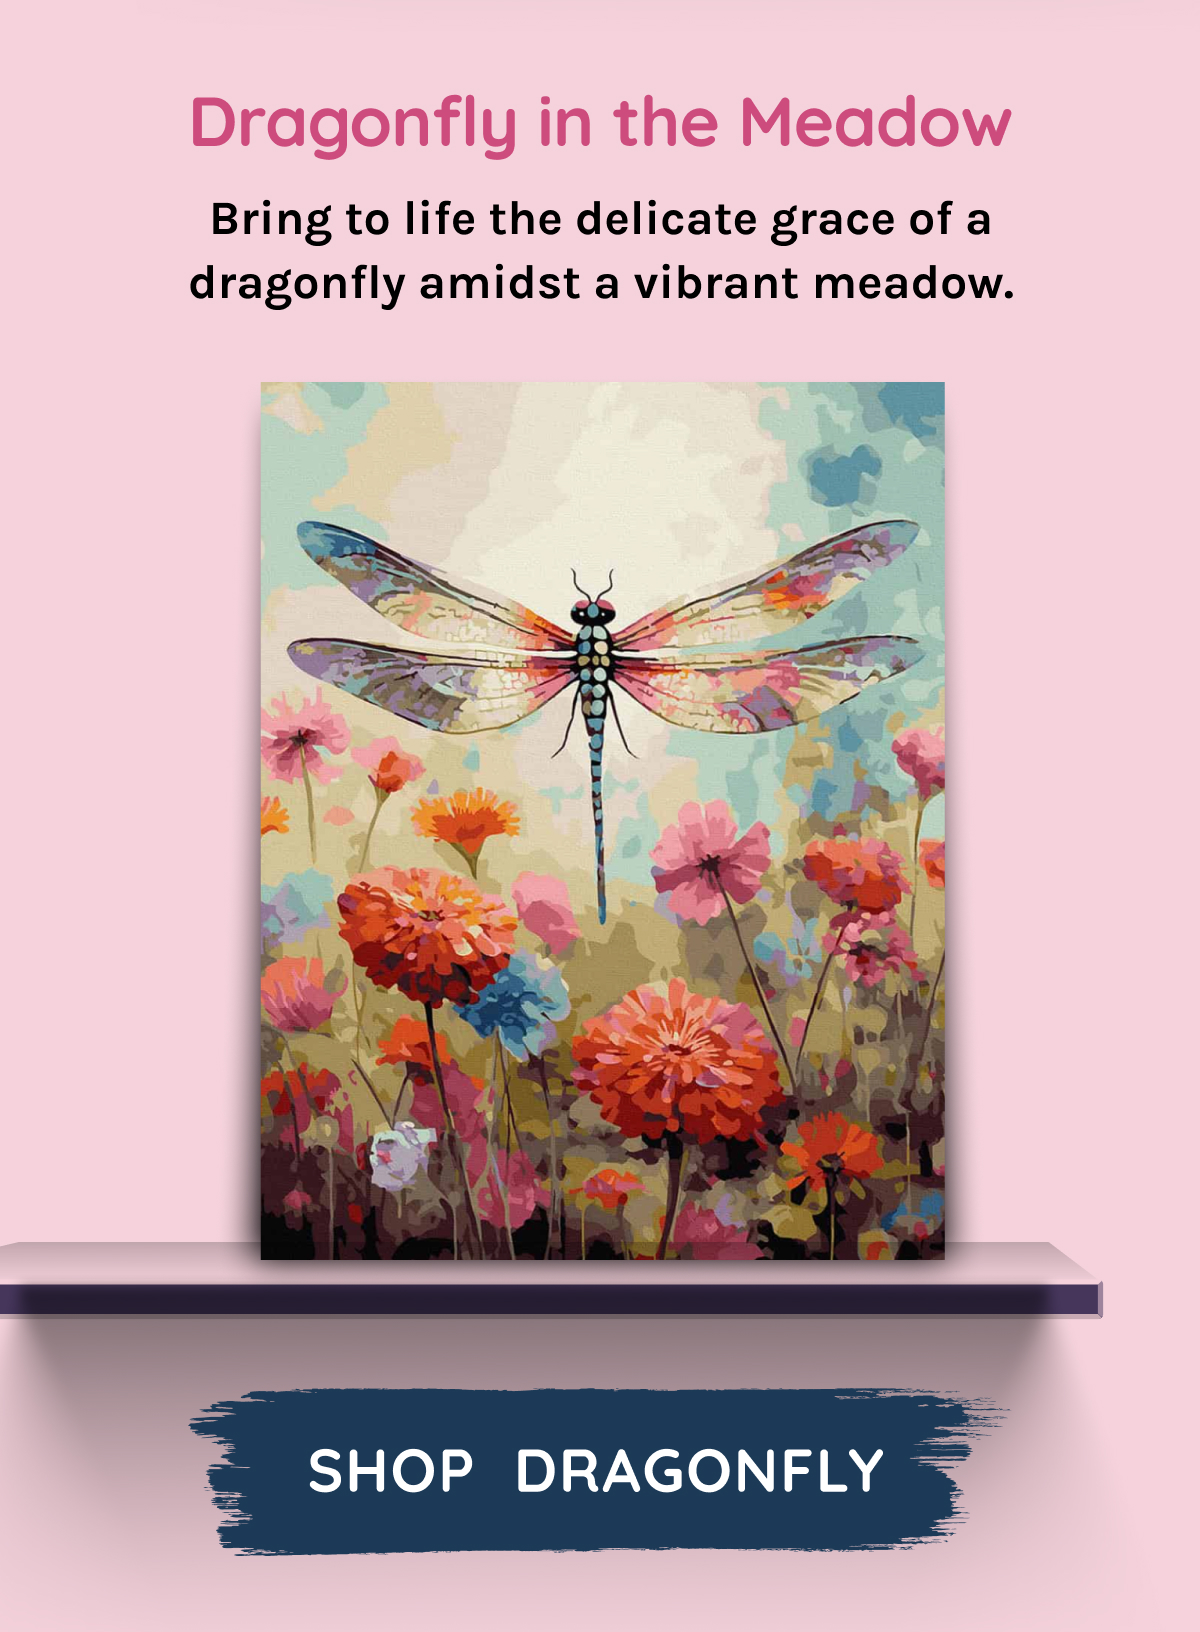 Dragonfly in the Meadow Bring to life the delicate grace of a dragonfly amidst a vibrant meadow.